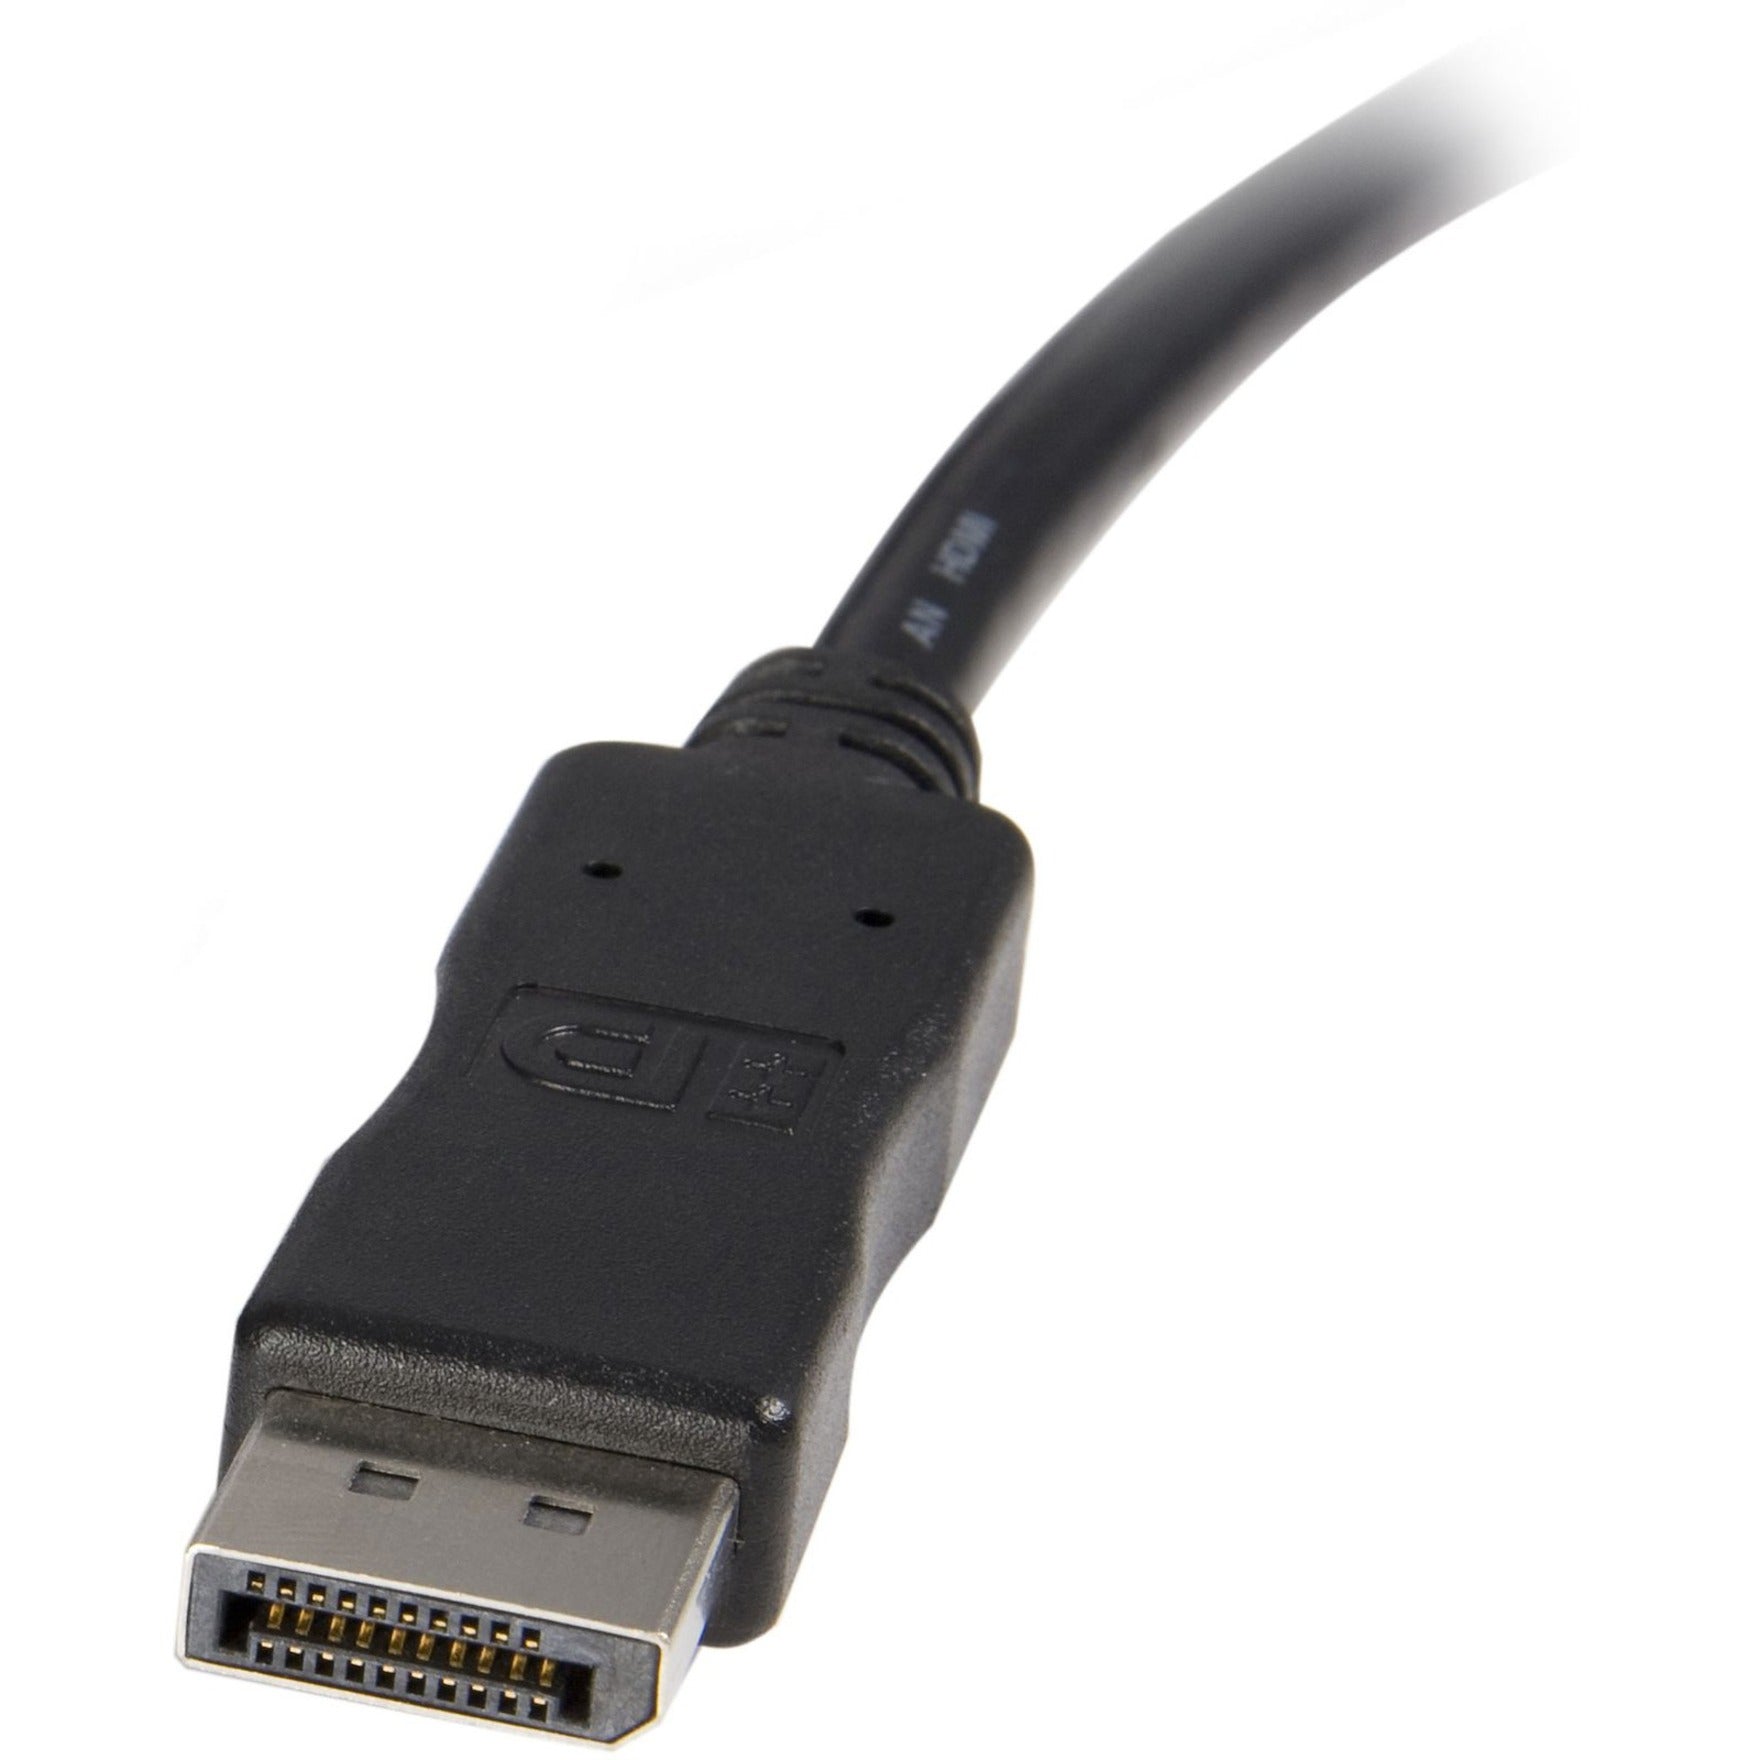 StarTech.com DP2DVIMM10 DisplayPort to DVI Cable, 10ft, 1080p Video, DP 1.2 to DVI Monitor Cable